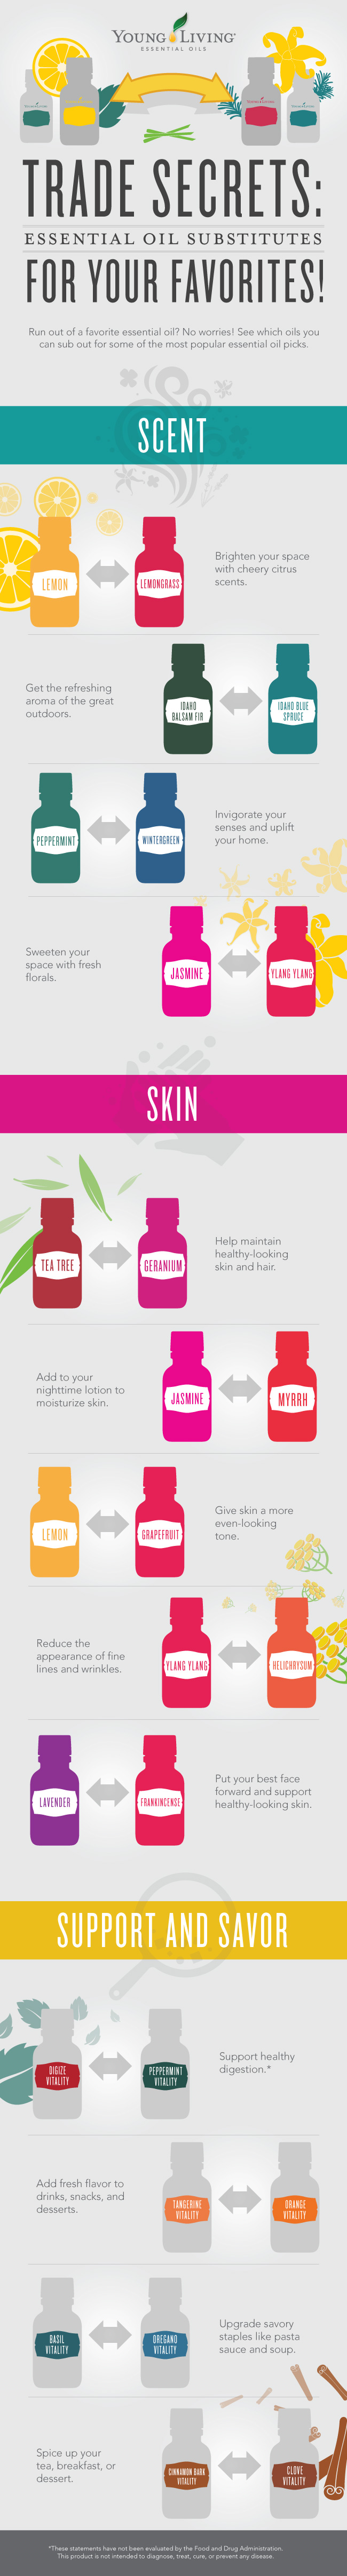 Essential Oil Substitutes Infographic | Young Living Essential Oils